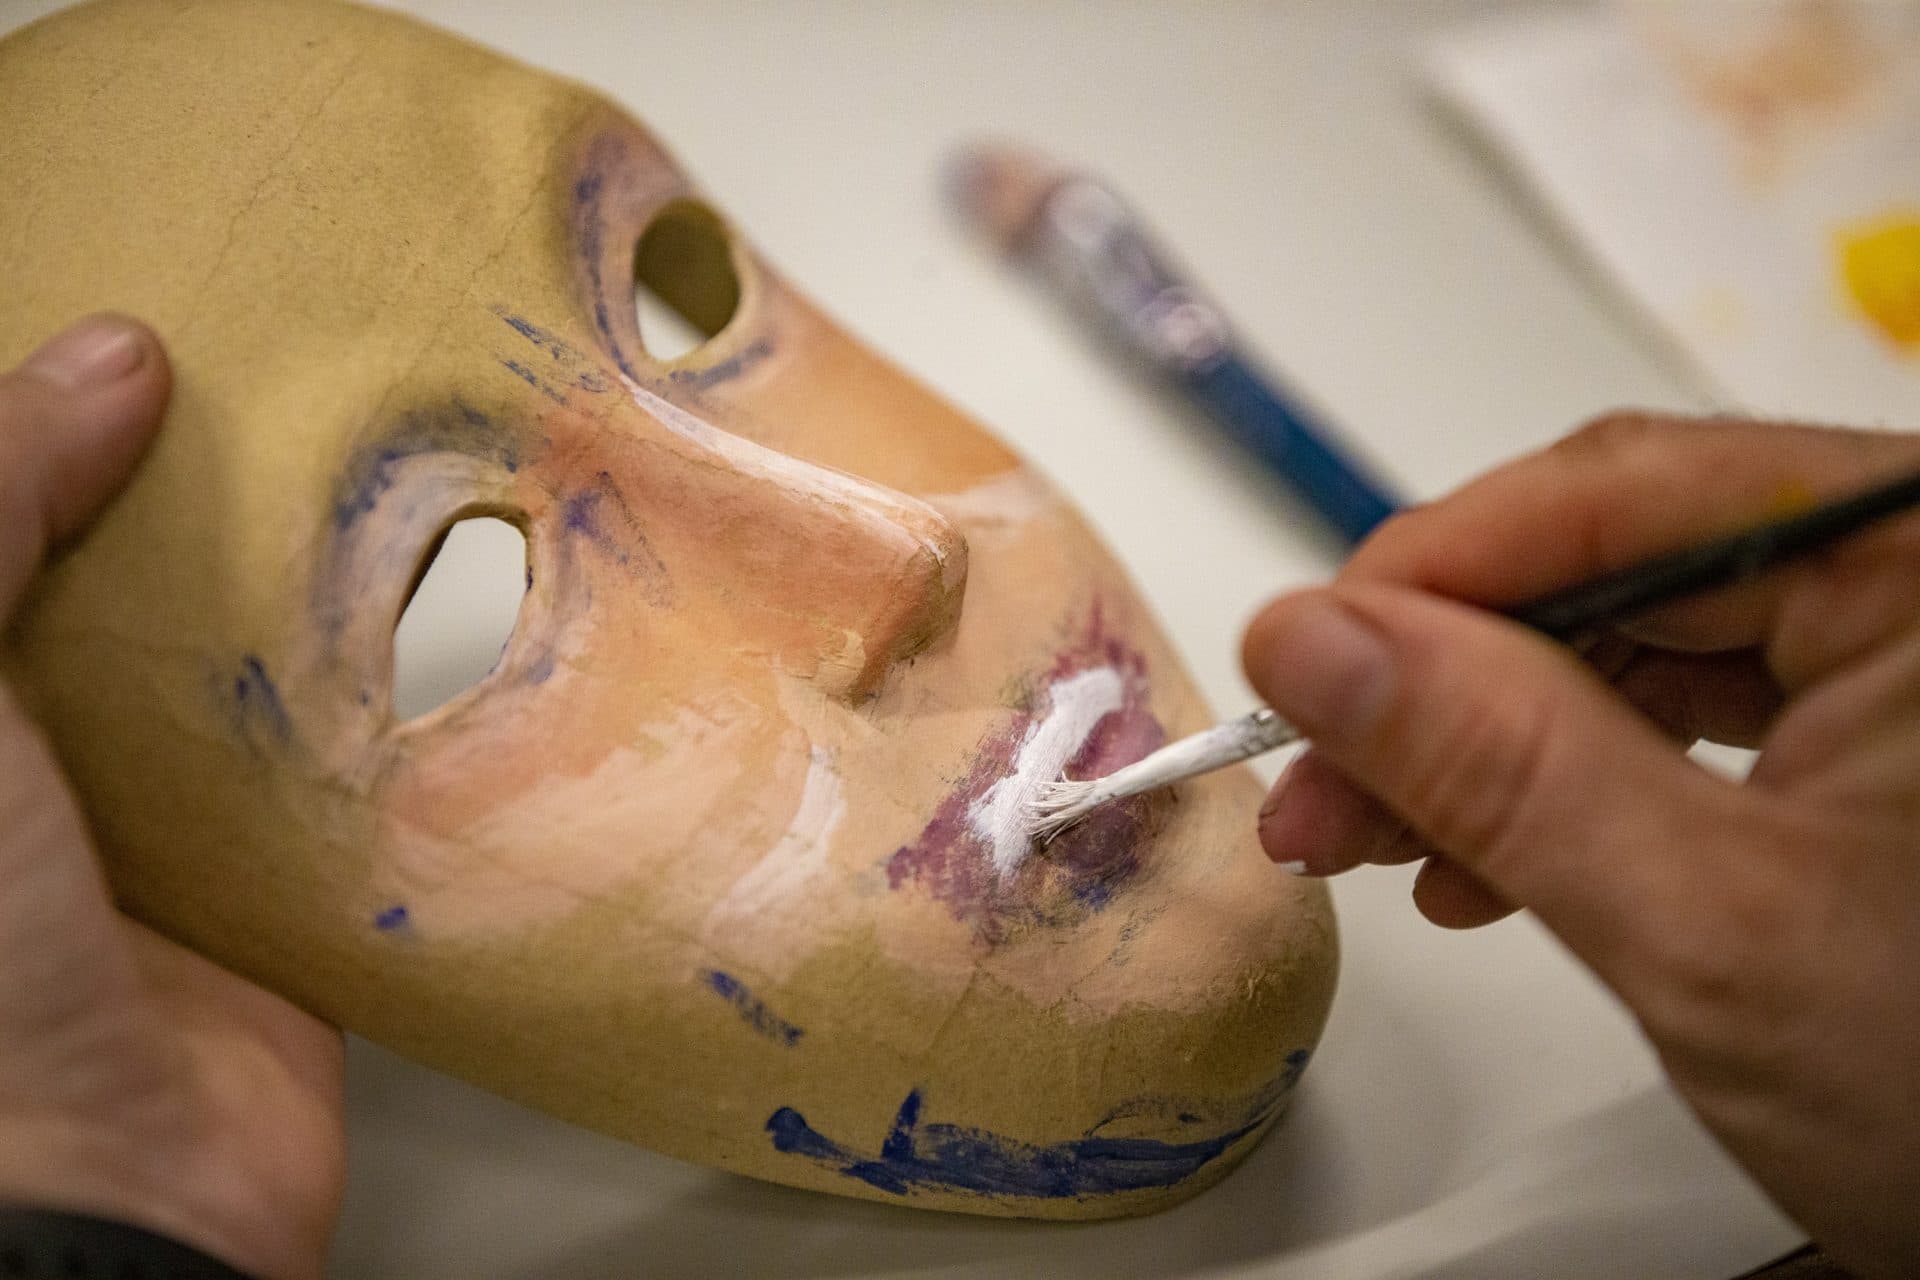 Hicks paints the outside of his mask. (Jesse Costa/WBUR)